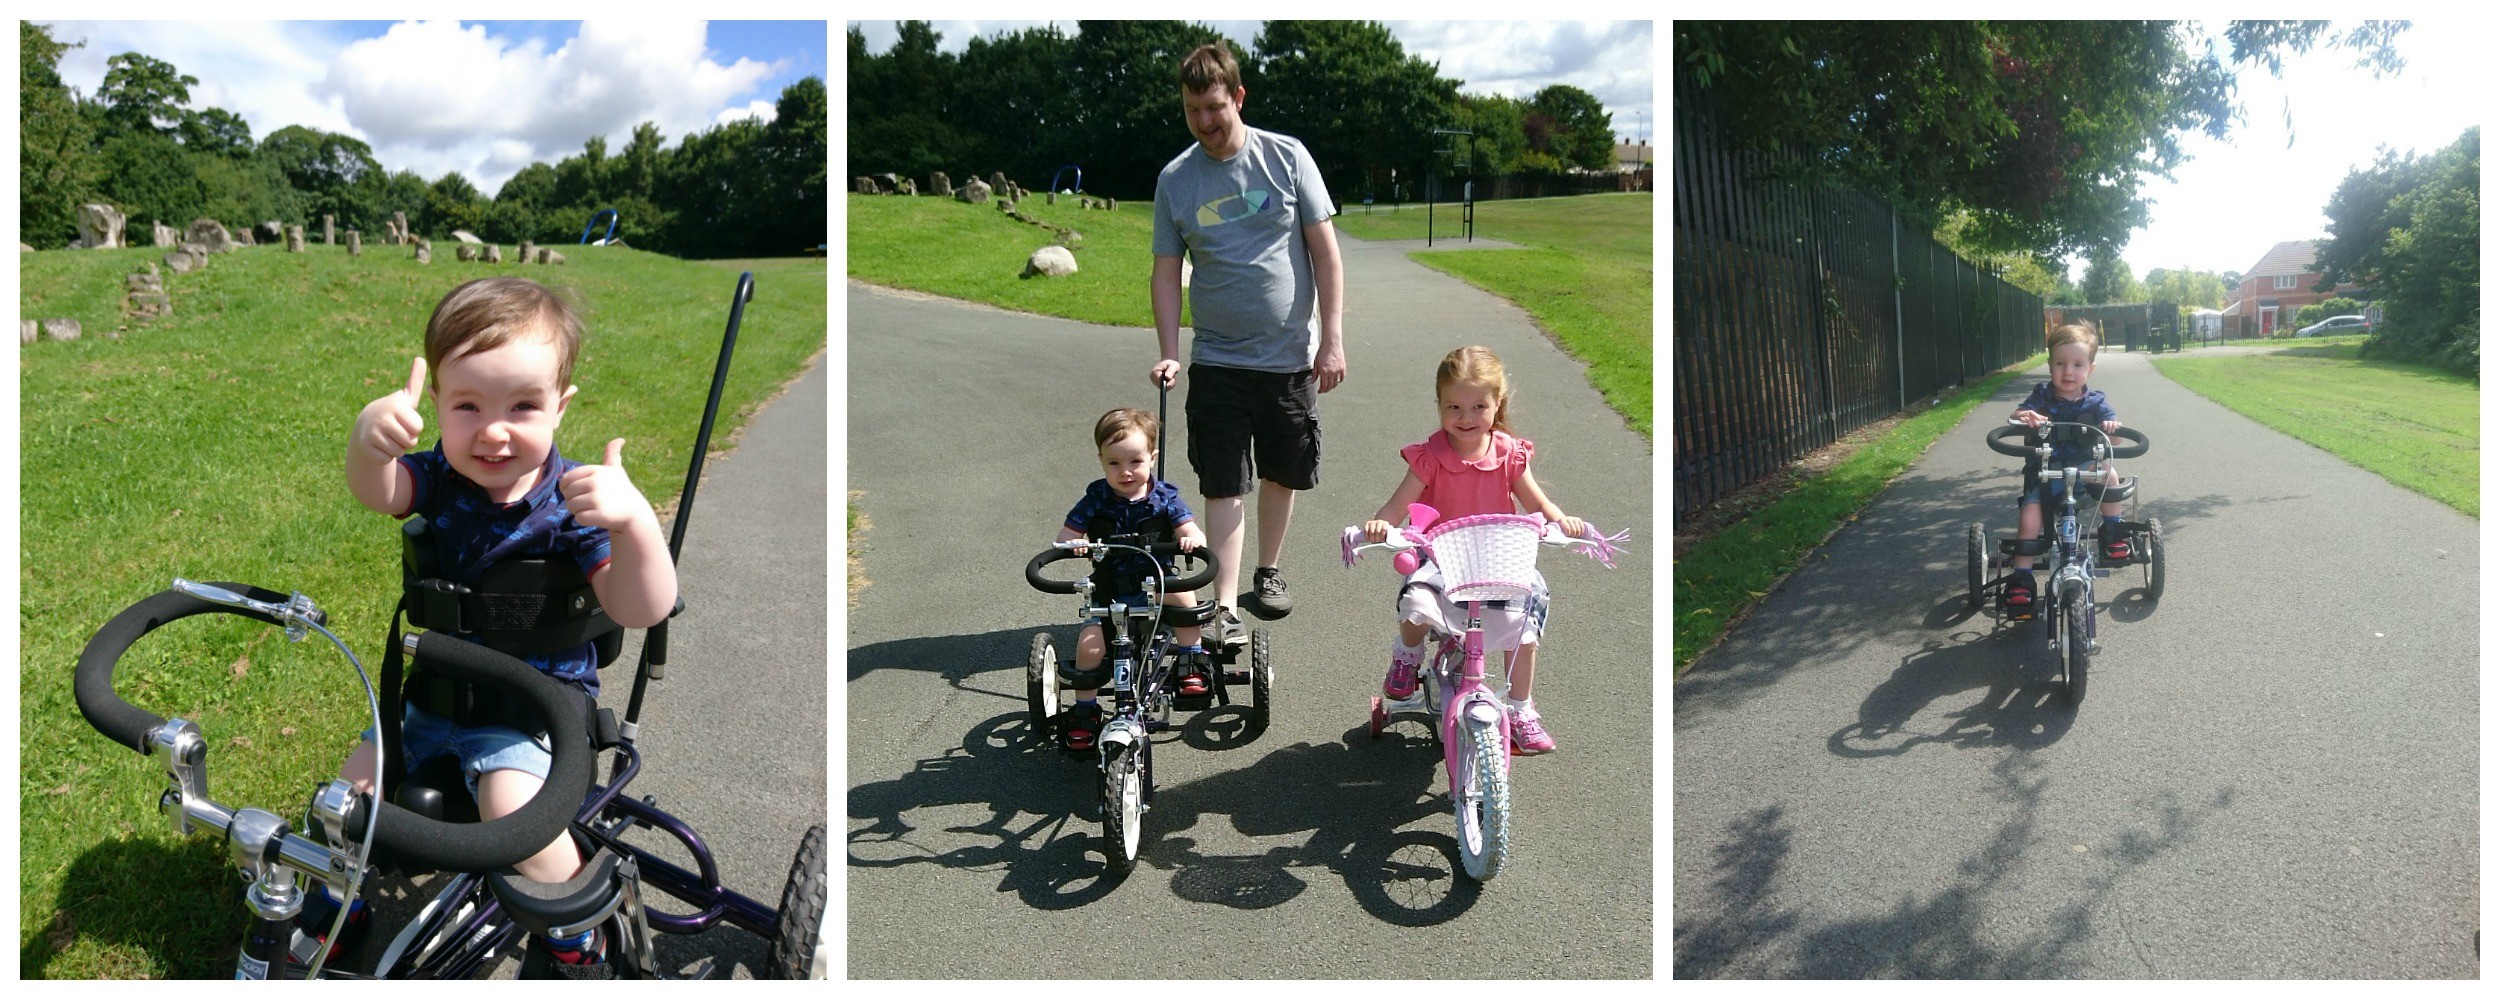 Collage of images of little boy on his trike in the park with his family